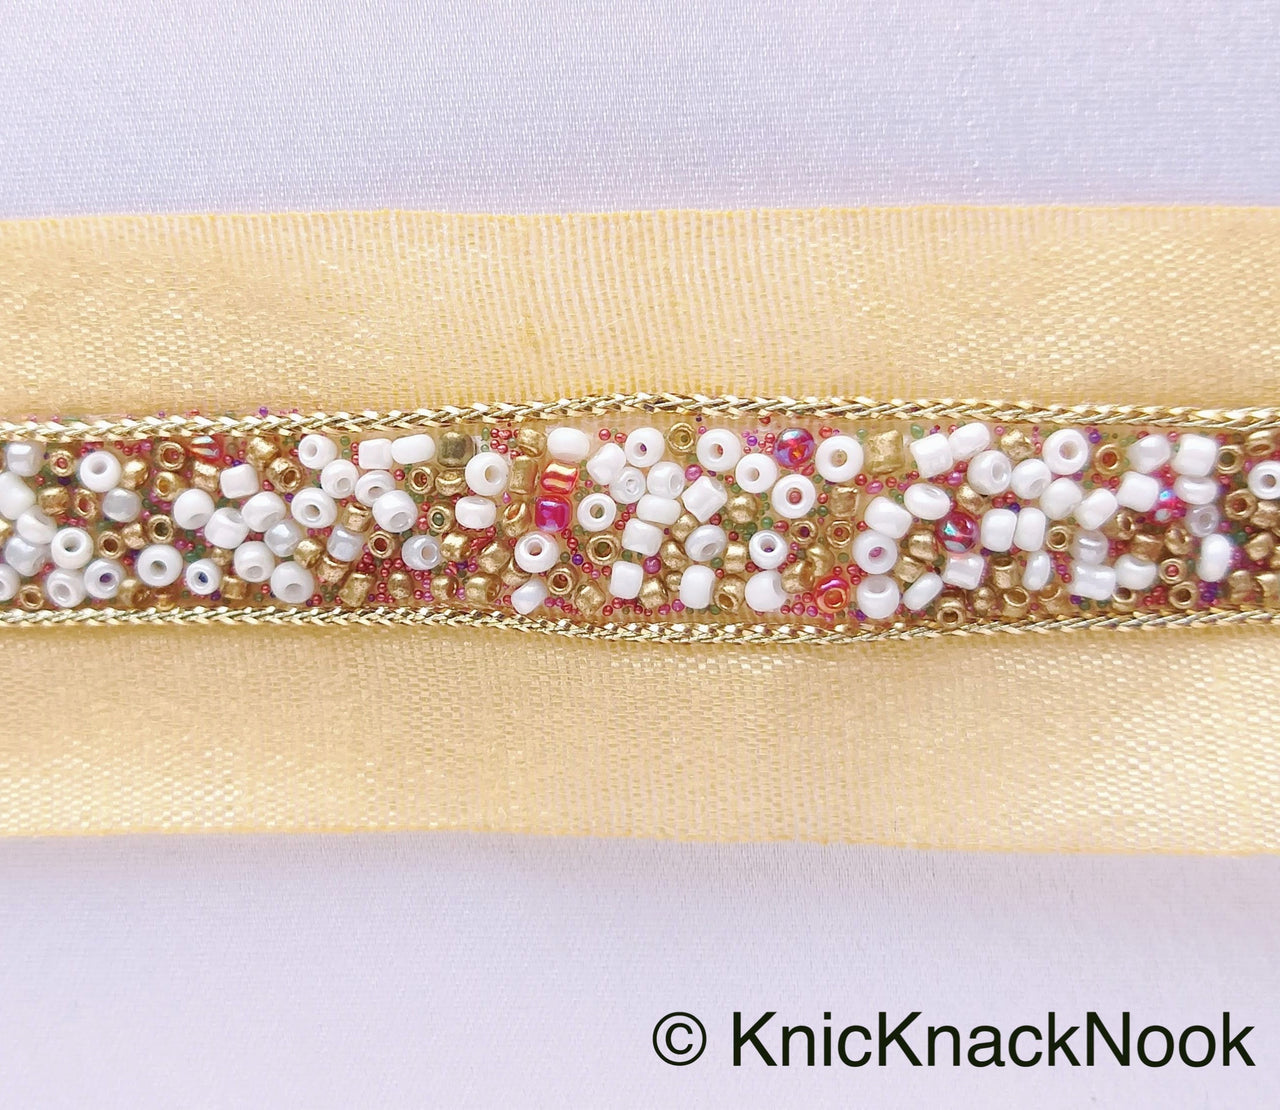 Beige Fabric Trim With Copper, Gold And White Beads Embellishments, Beaded Trim